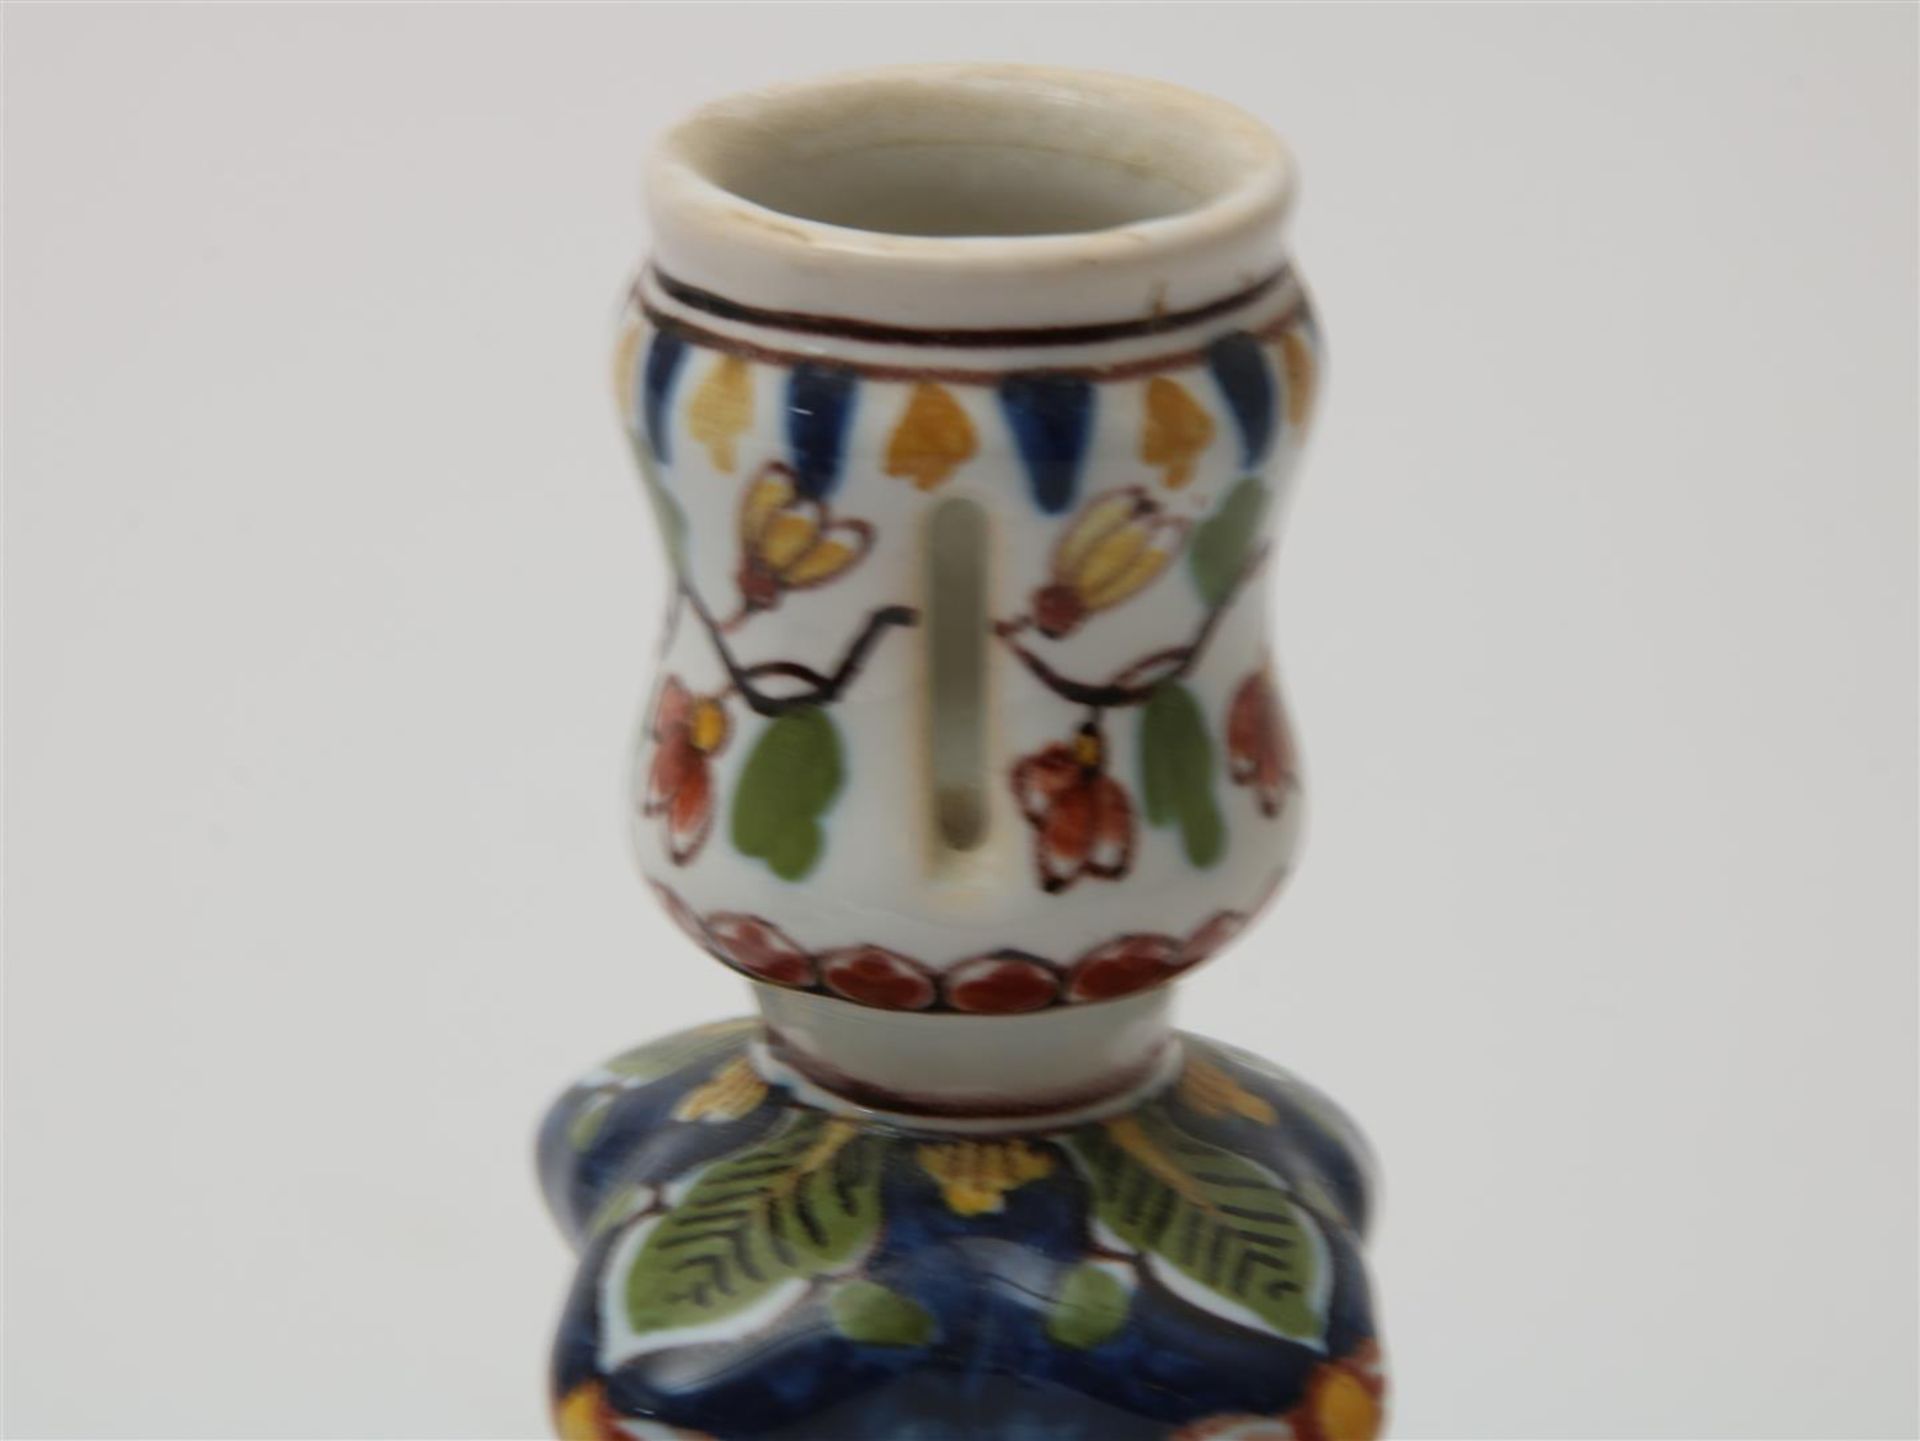 Lot of a polychrome earthenware candlestick, h. 21 cm., polychrome earthenware tea caddy, h. 13 - Image 8 of 9